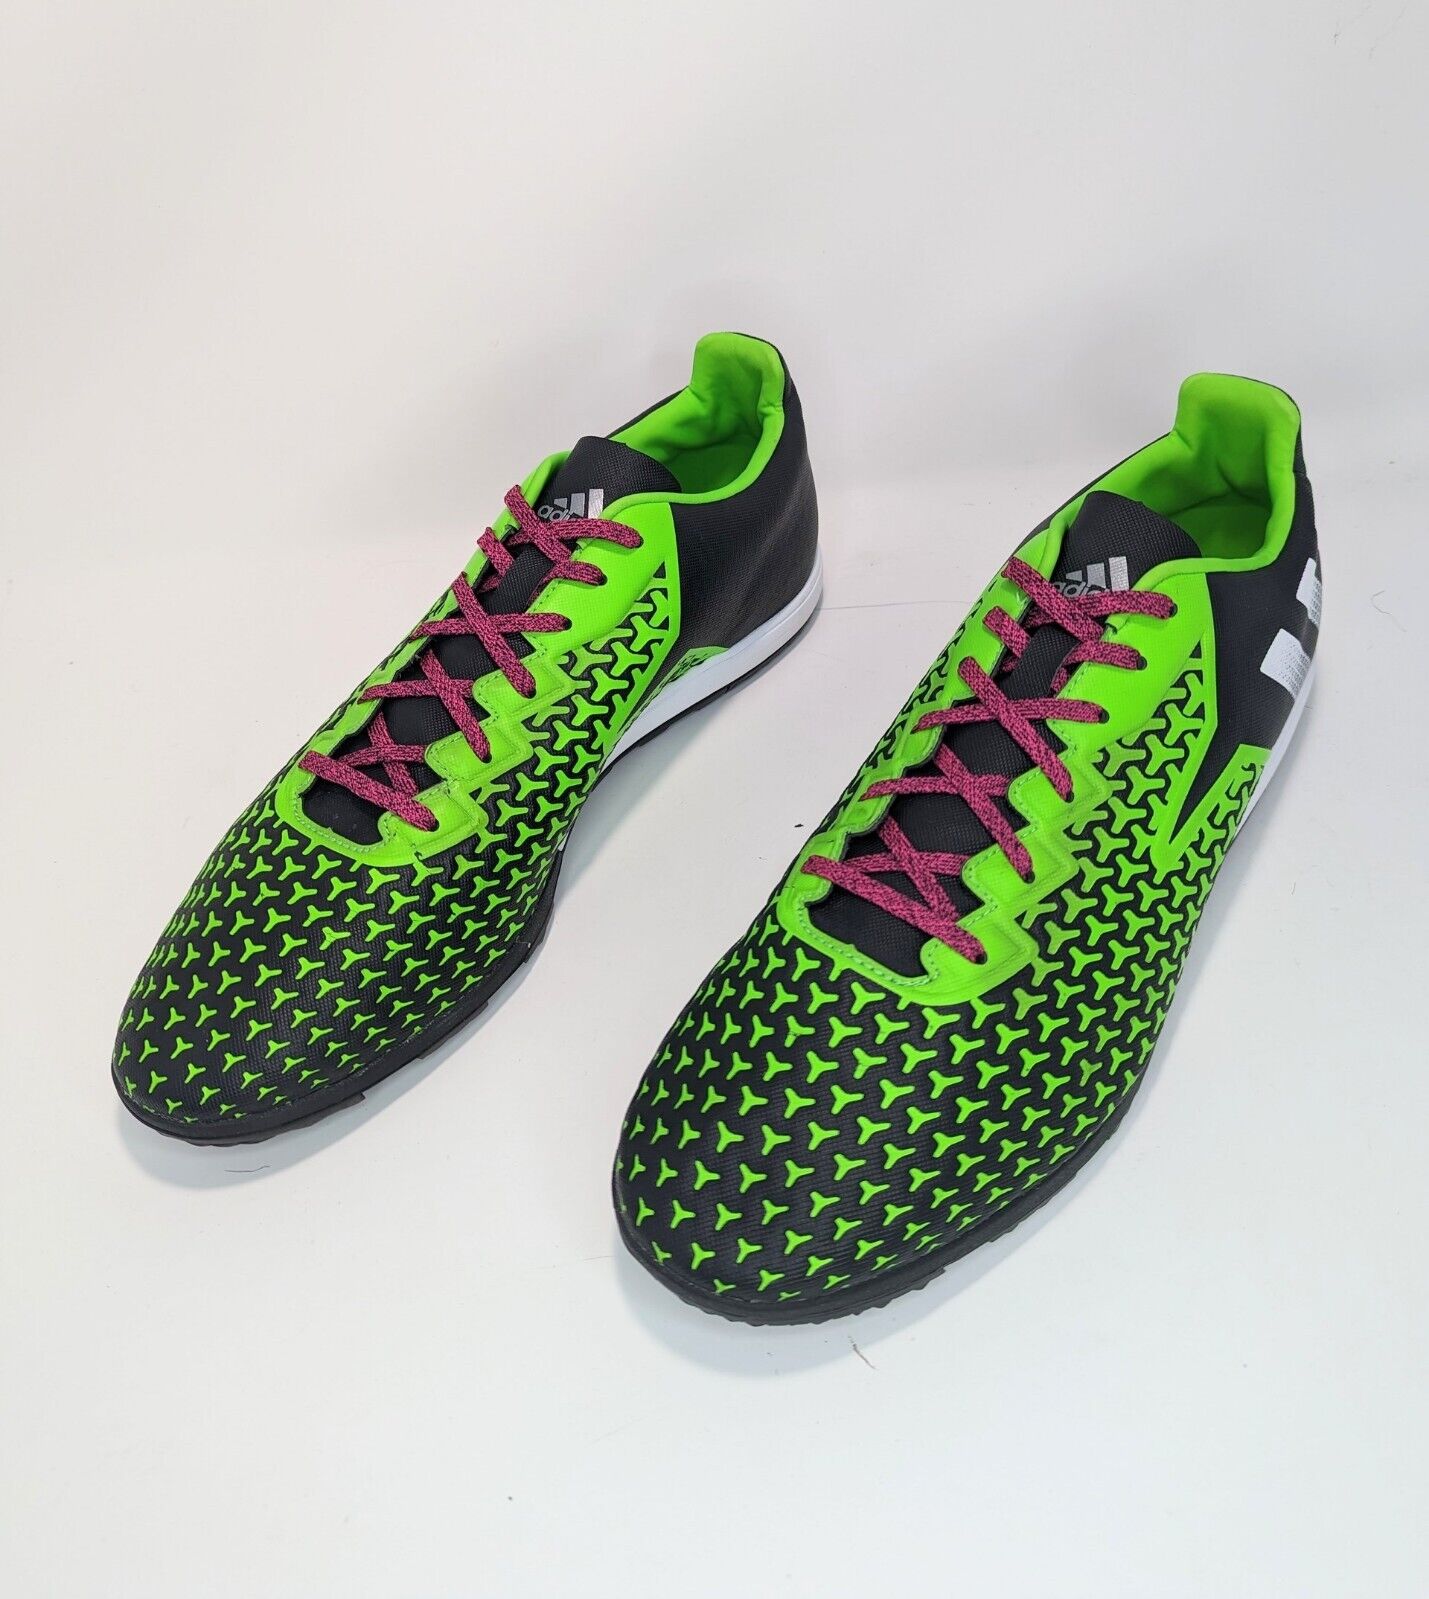 16.2 Cage AF5295 soccer turf US Sz11.5 New without tags or box | eBay